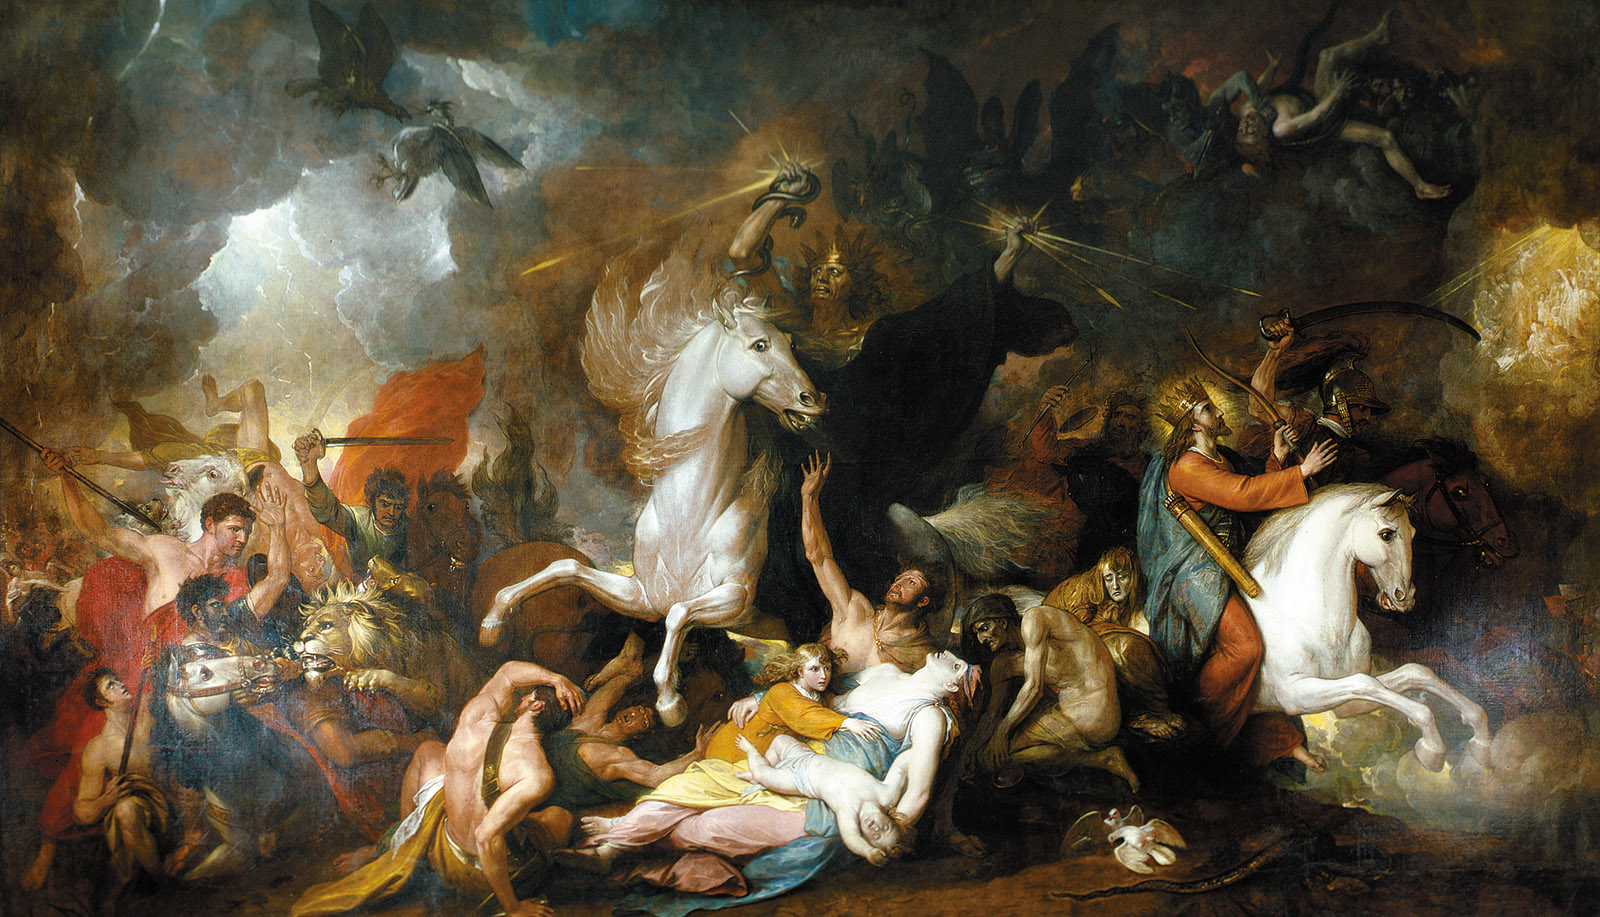 Benjamin West: Death on the Pale Horse, 1817